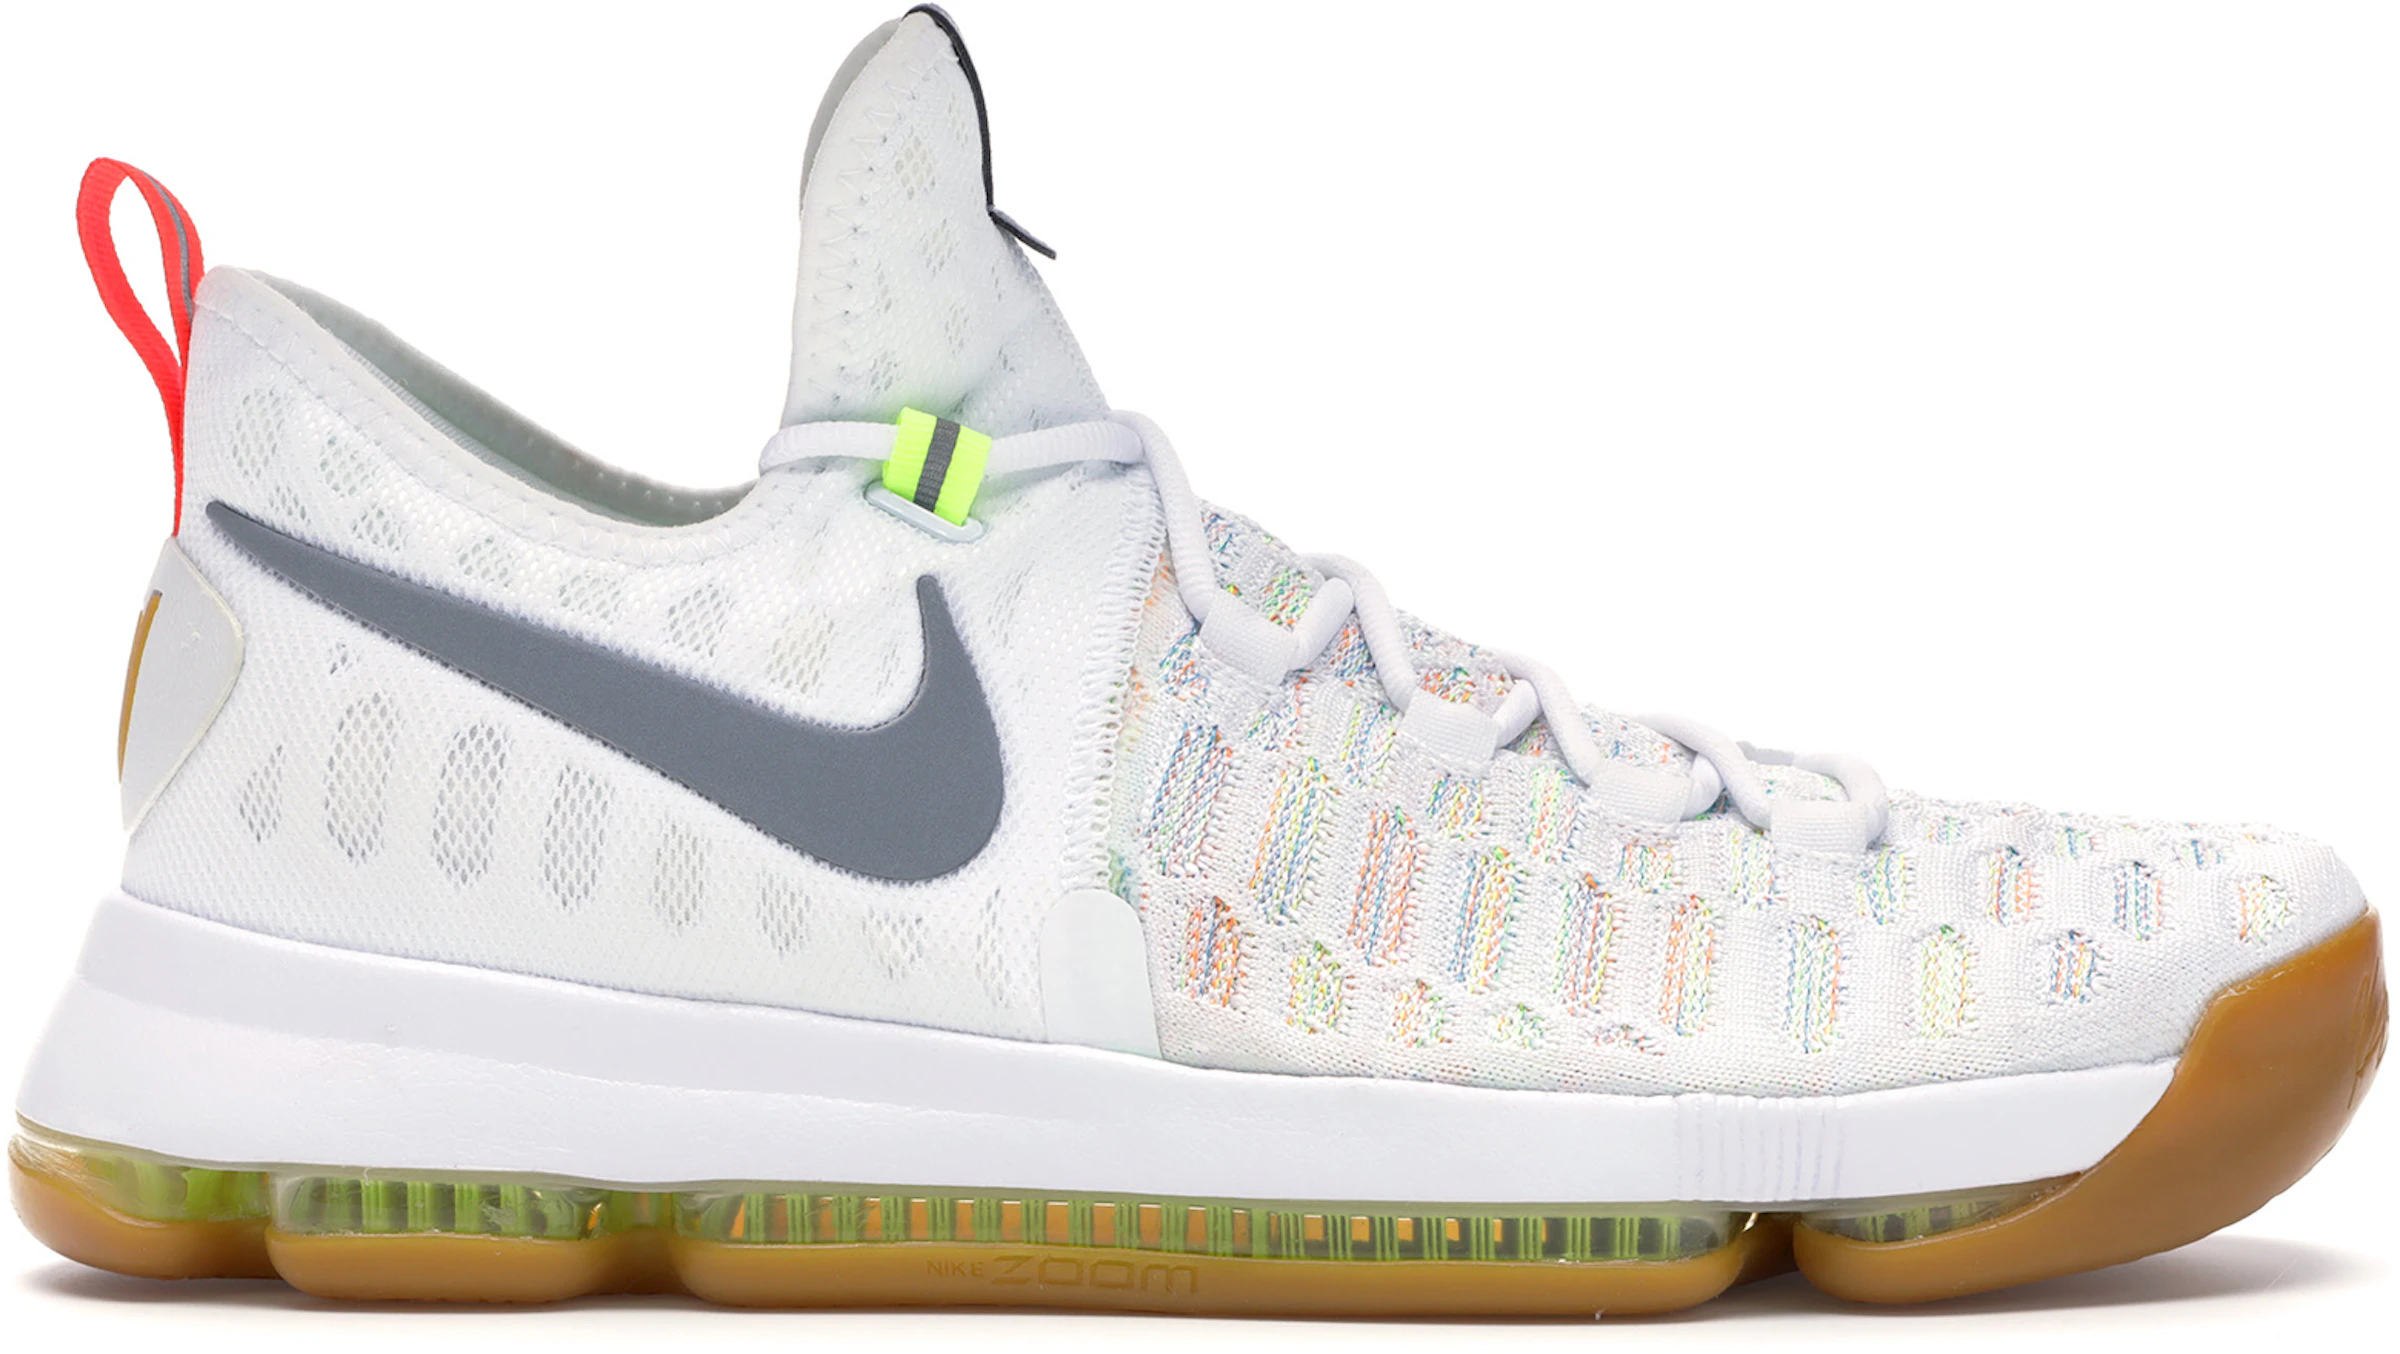 Buy Nike KD 9 Shoes & New Sneakers - StockX